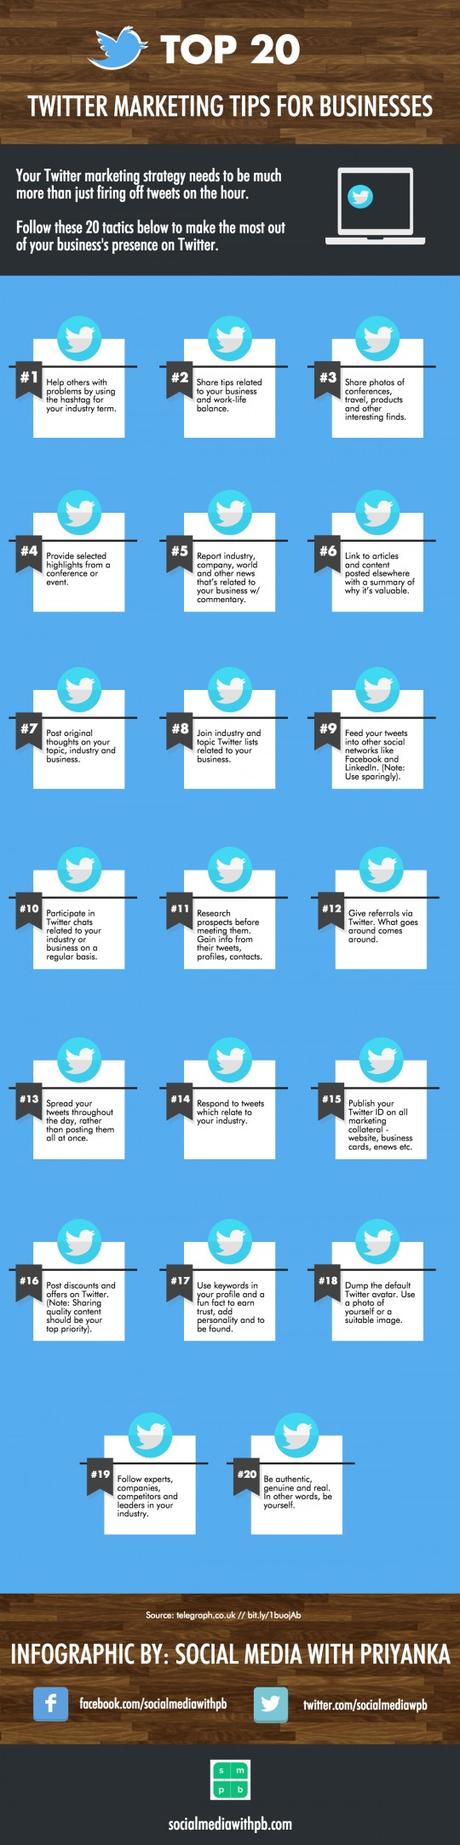 Top 20 Twitter Marketing Tips for Businesses [Infographic]